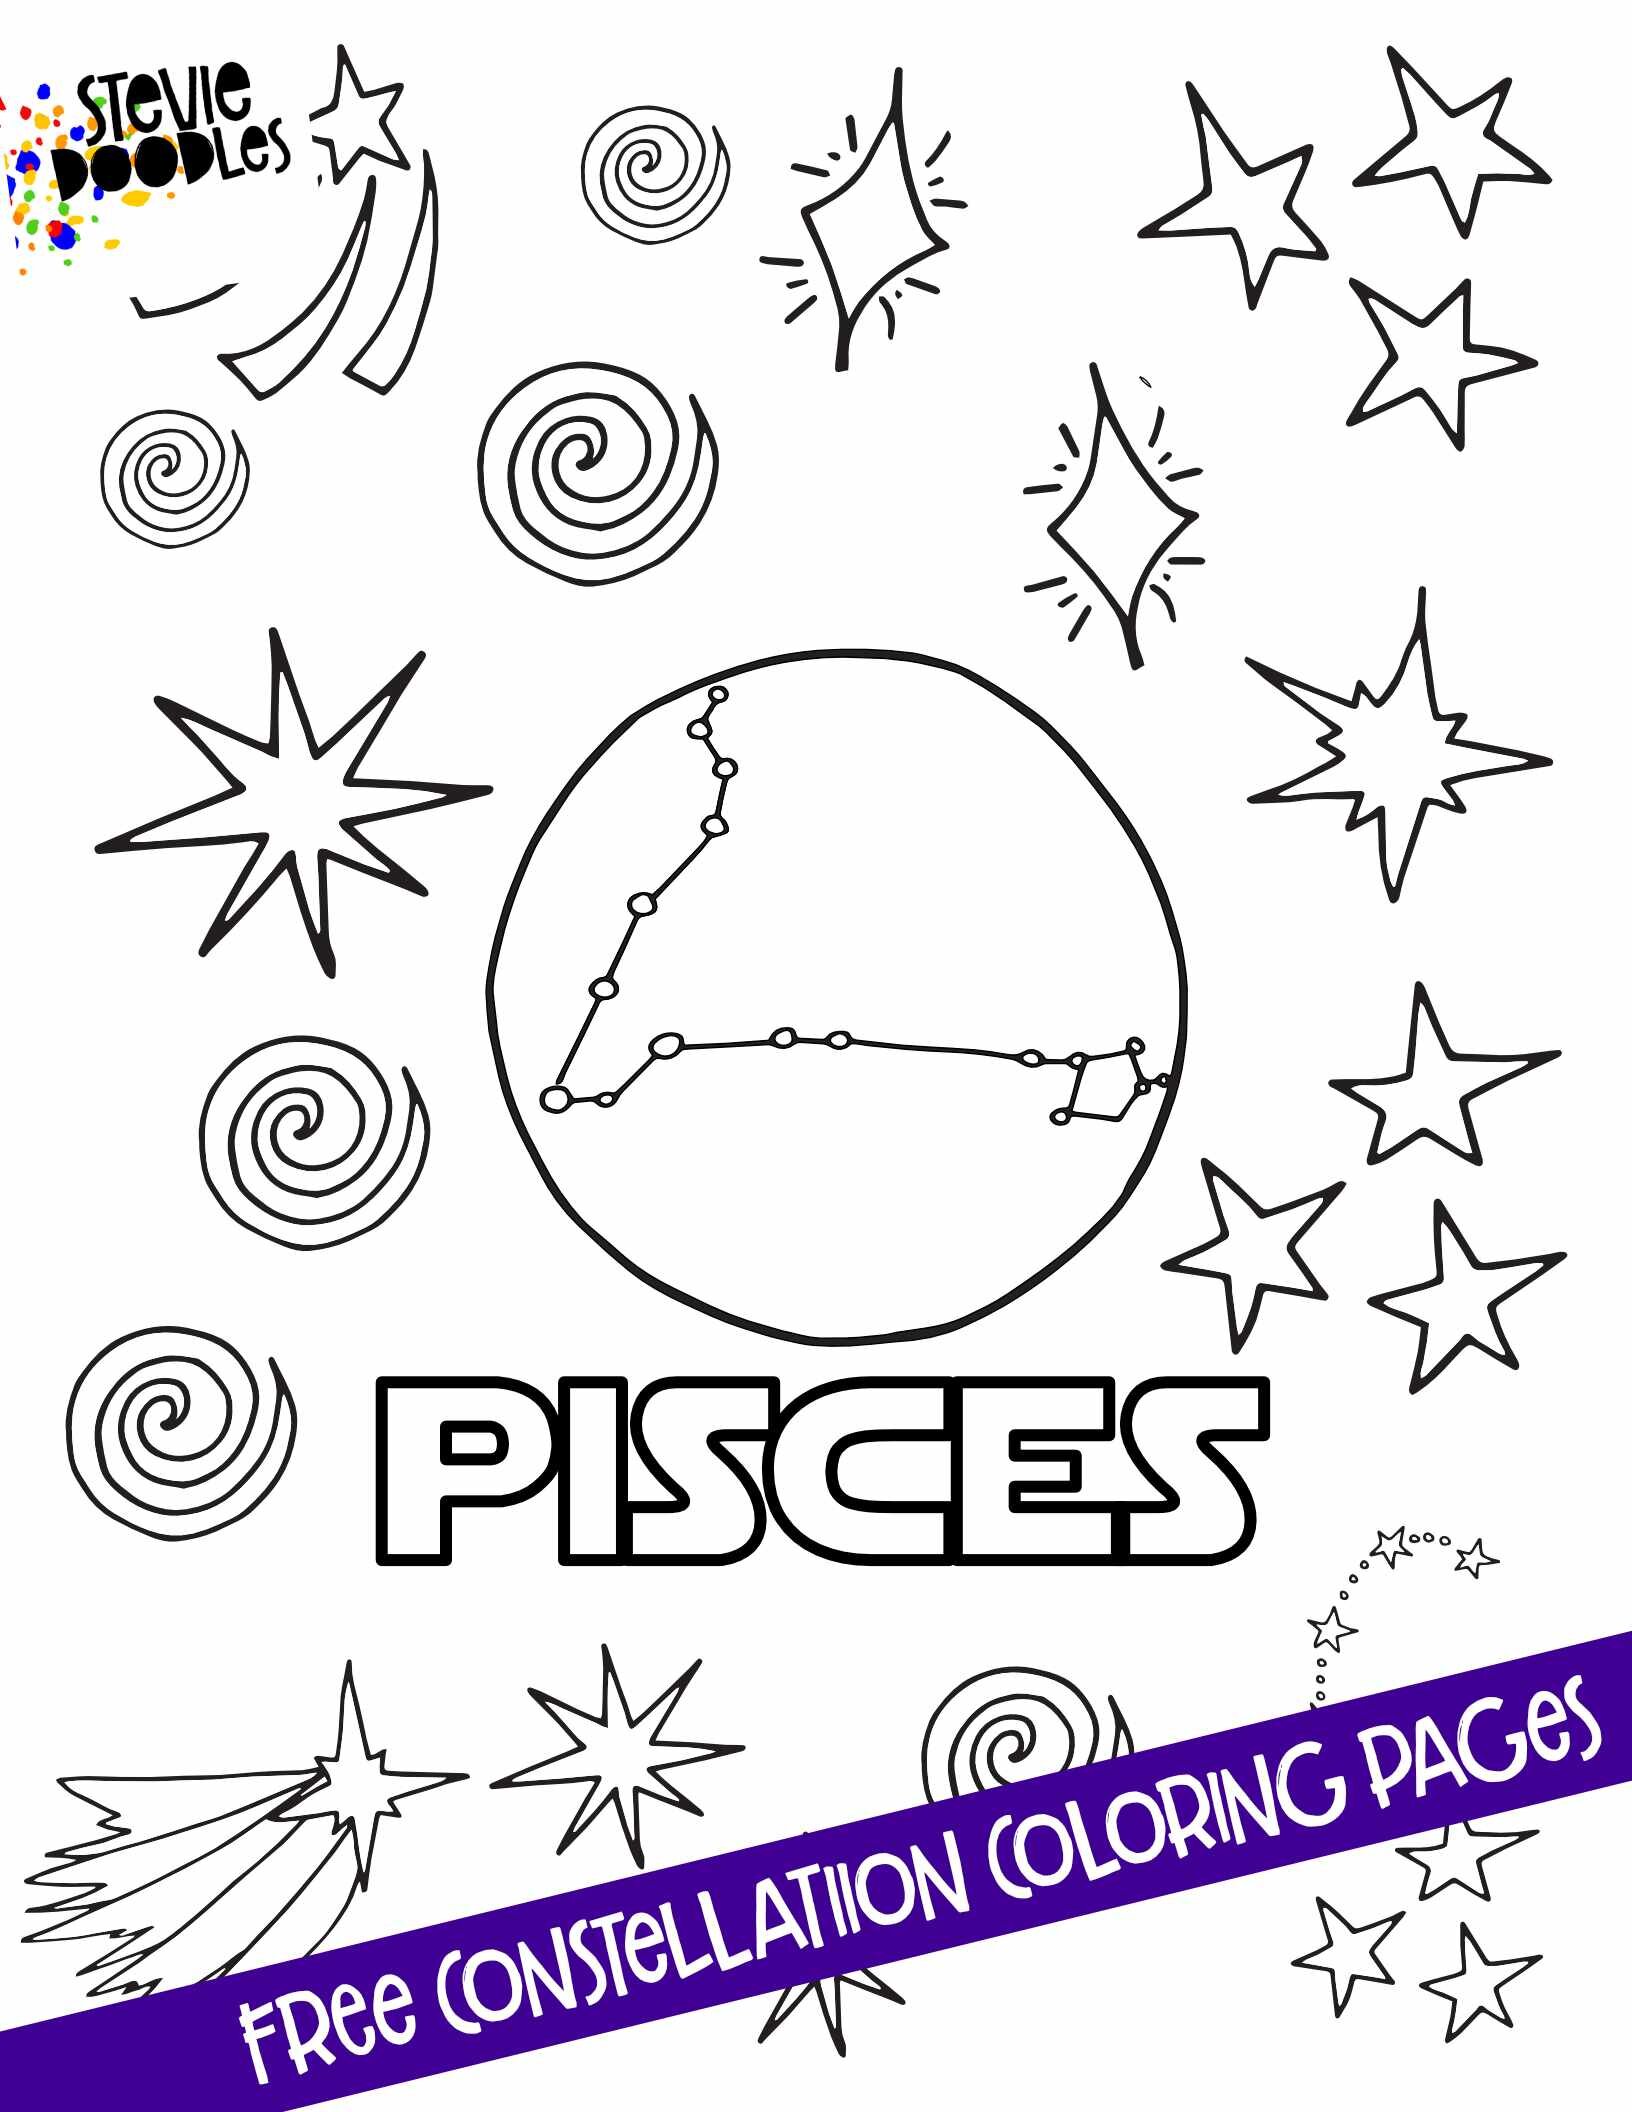 PISCES - 12 Free Constellation Coloring Pages - Over 1000 Free Coloring Pages CLICK HERE TO PRINT THE PAGE ABOVE